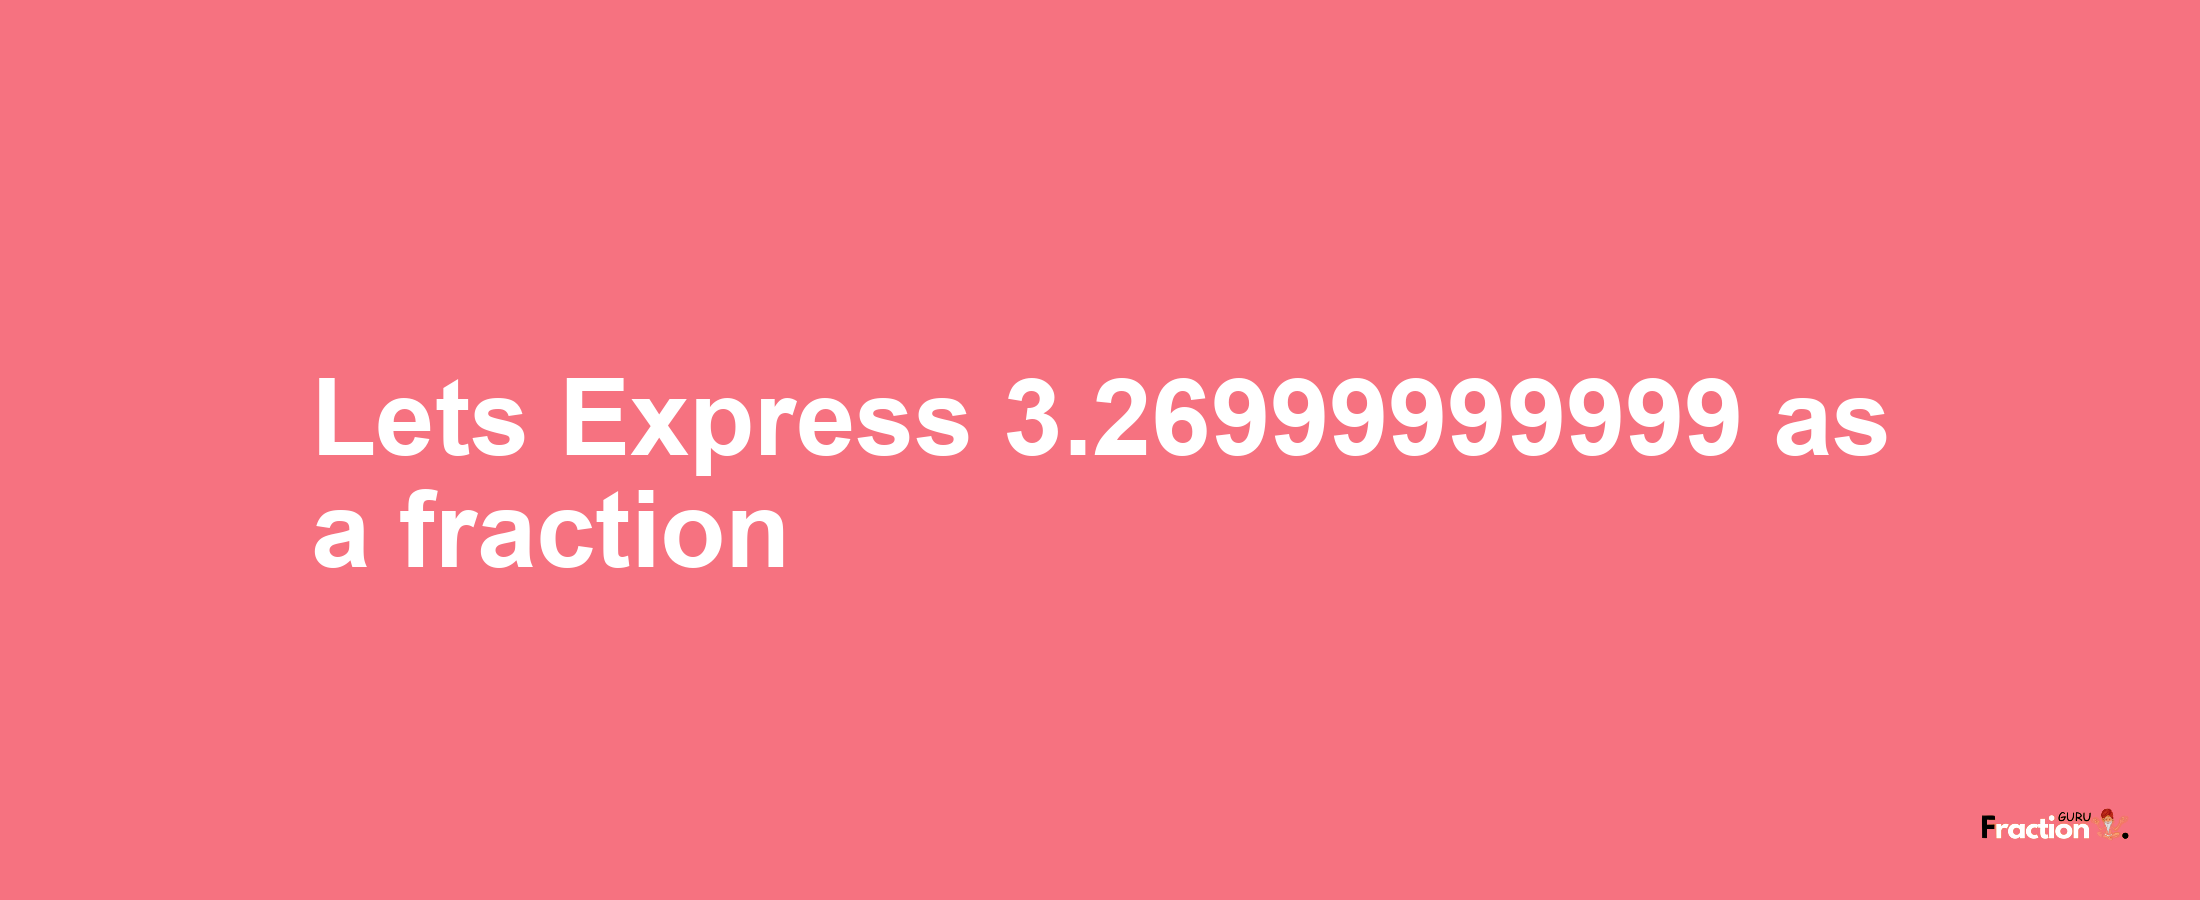 Lets Express 3.26999999999 as afraction